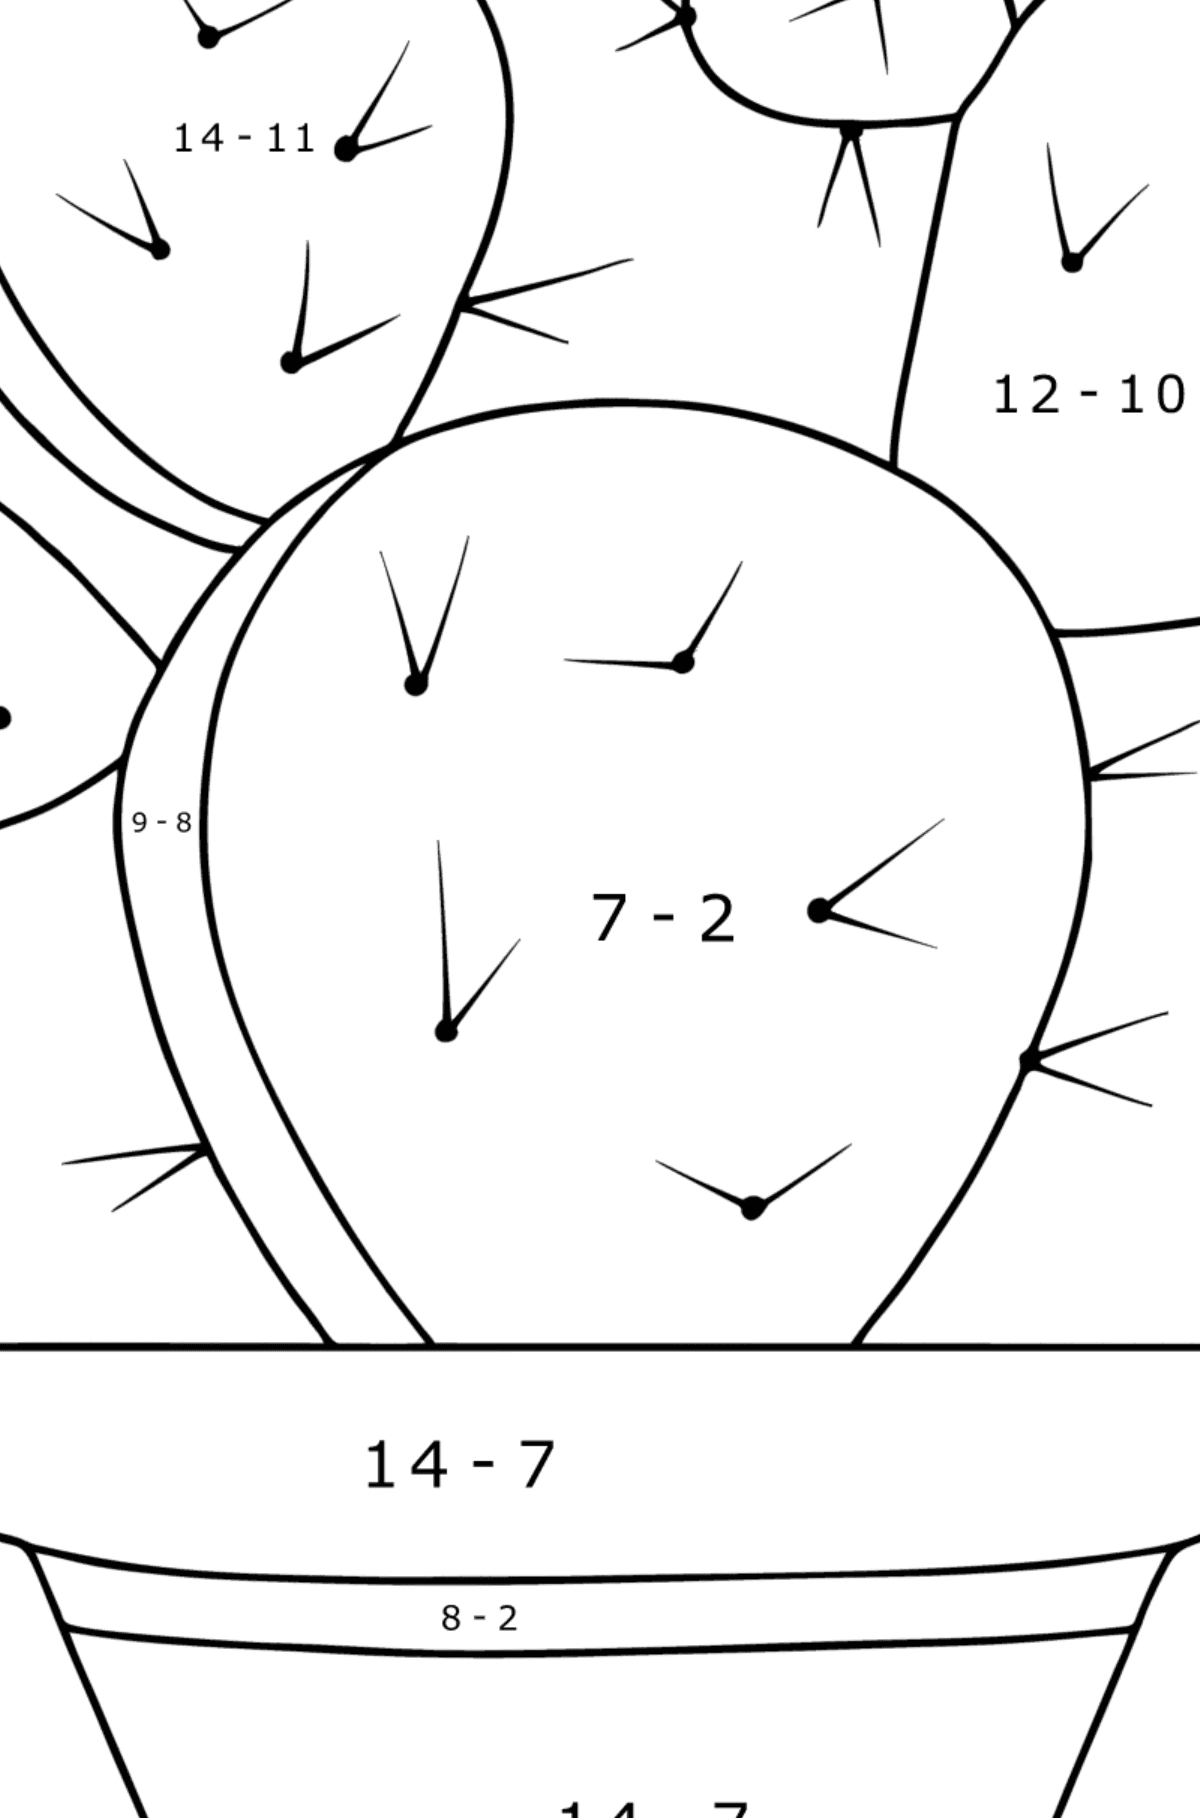 Prickly pear Cactus coloring page - Math Coloring - Subtraction for Kids